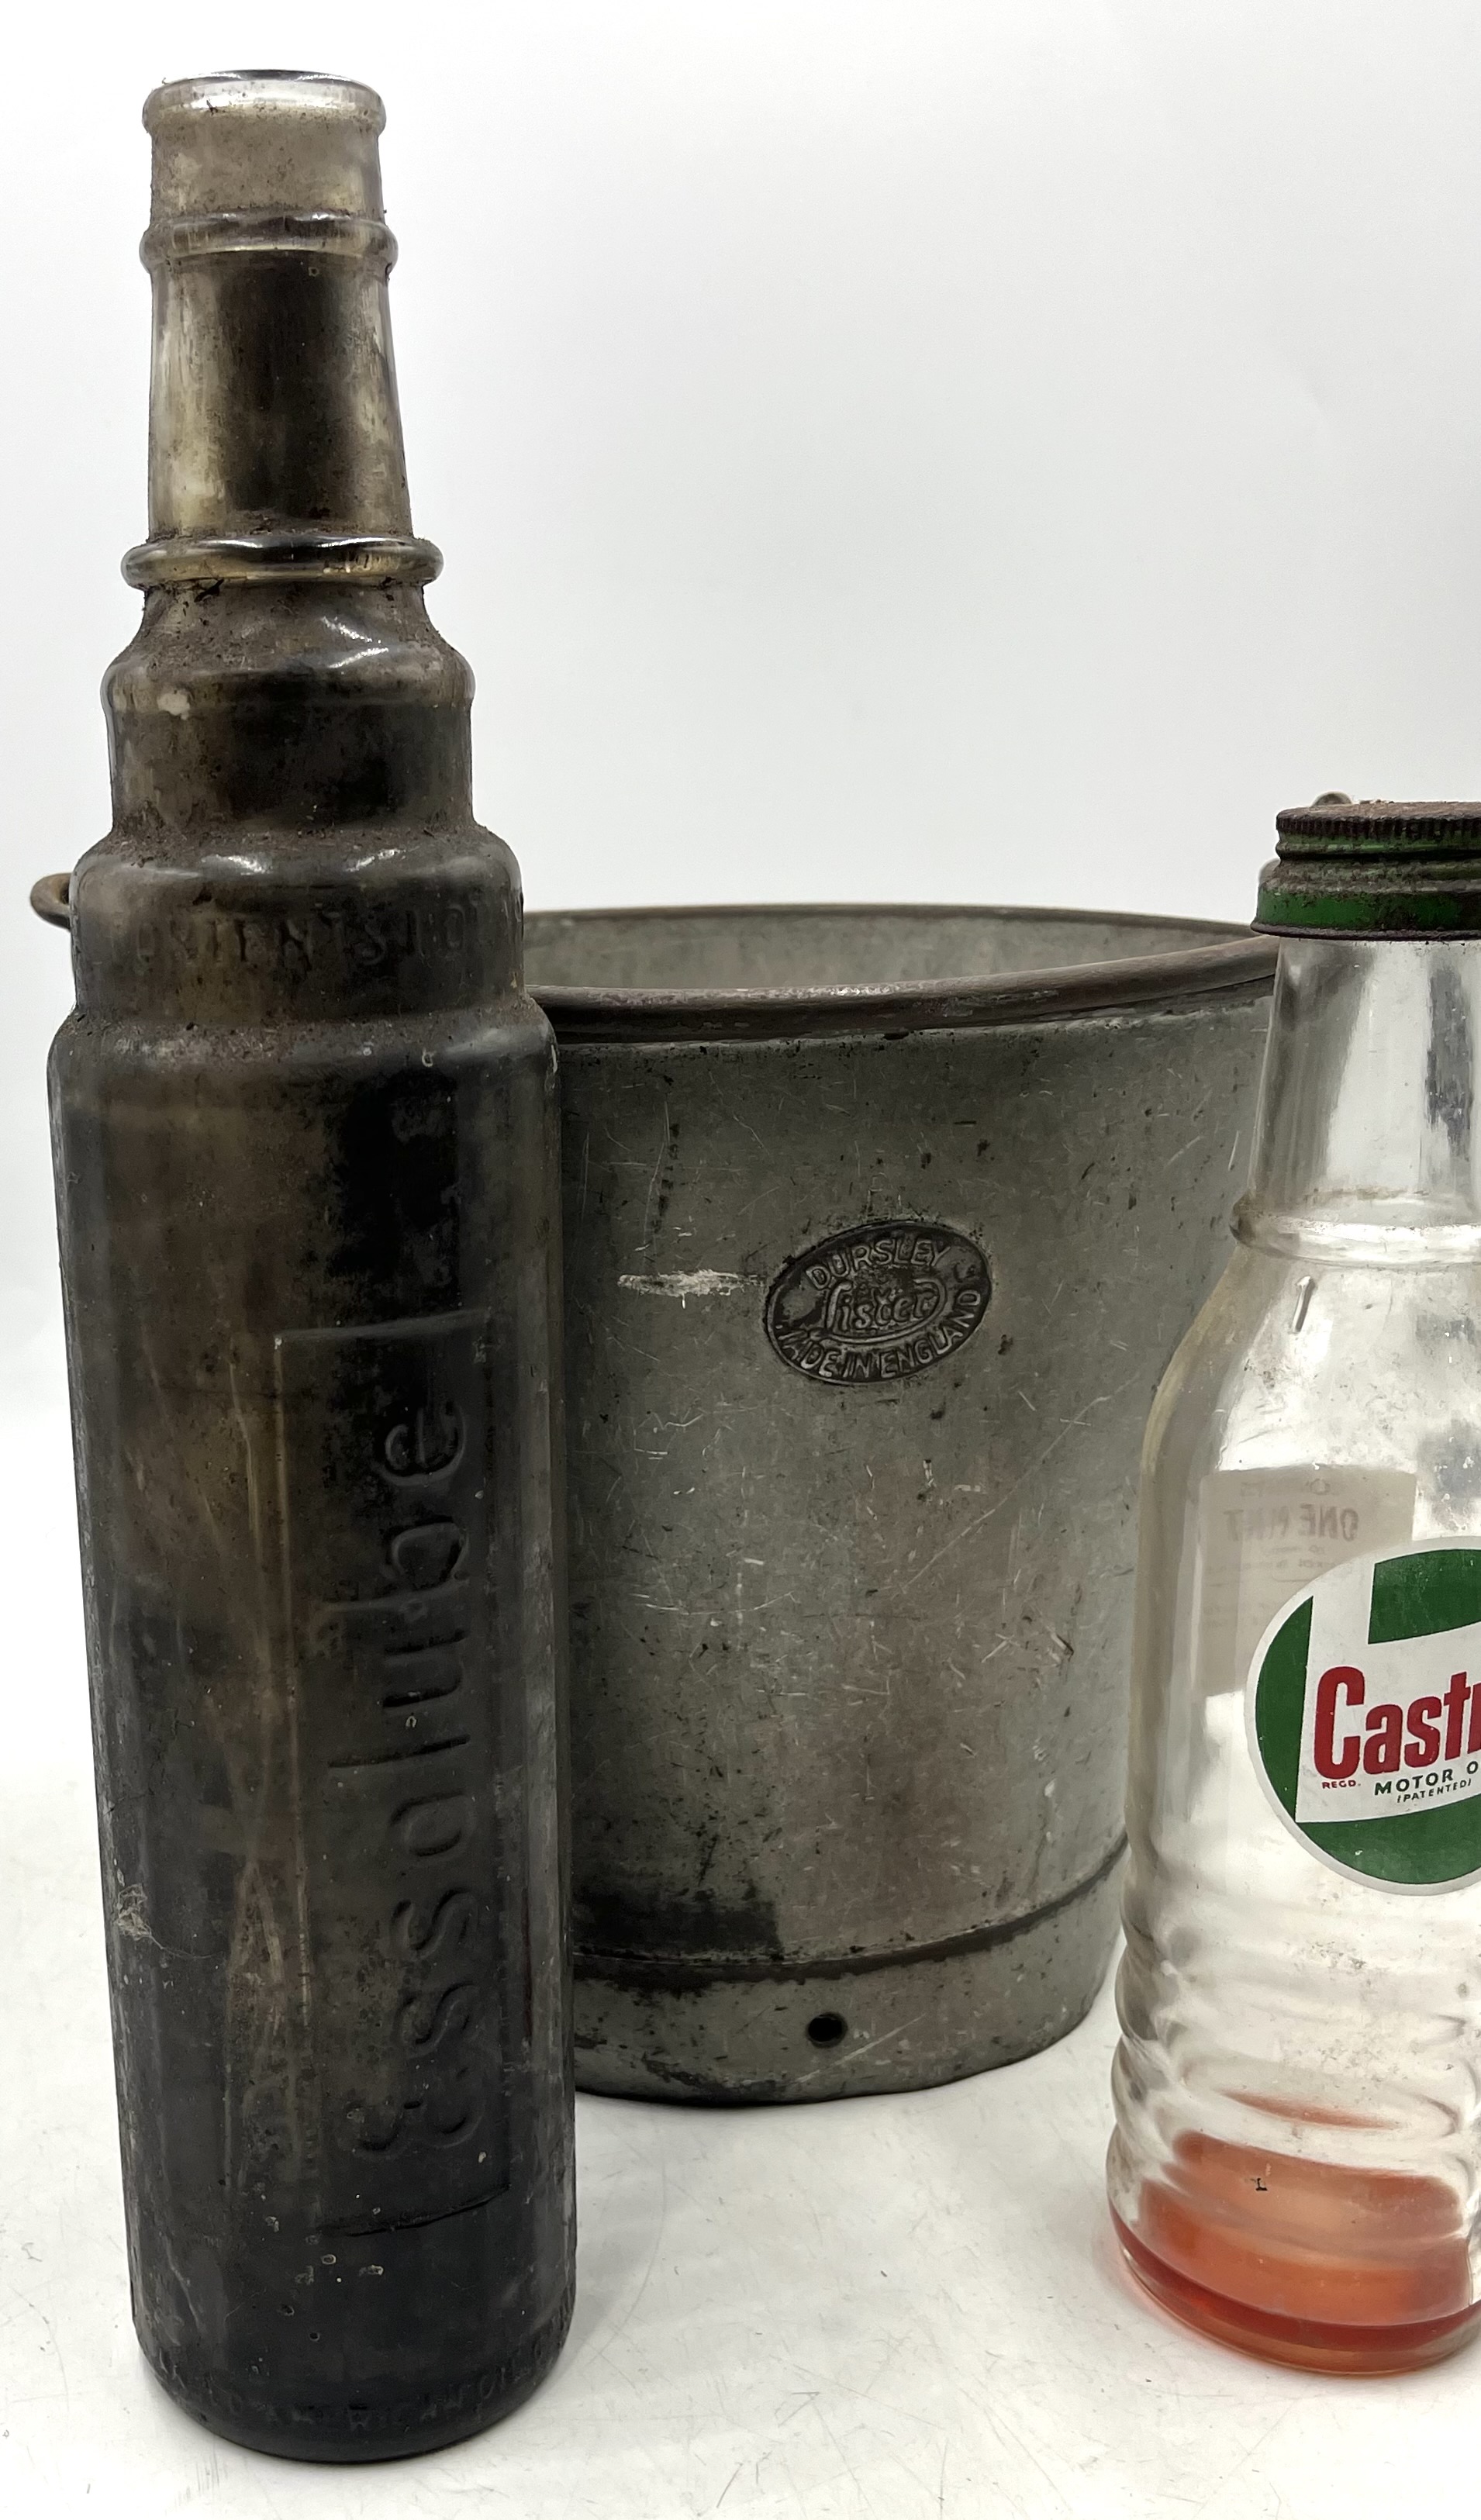 A galvanised Lister bucket along with a Castrol Motor Oil bottle and an Esso lube bottle. - Image 5 of 8